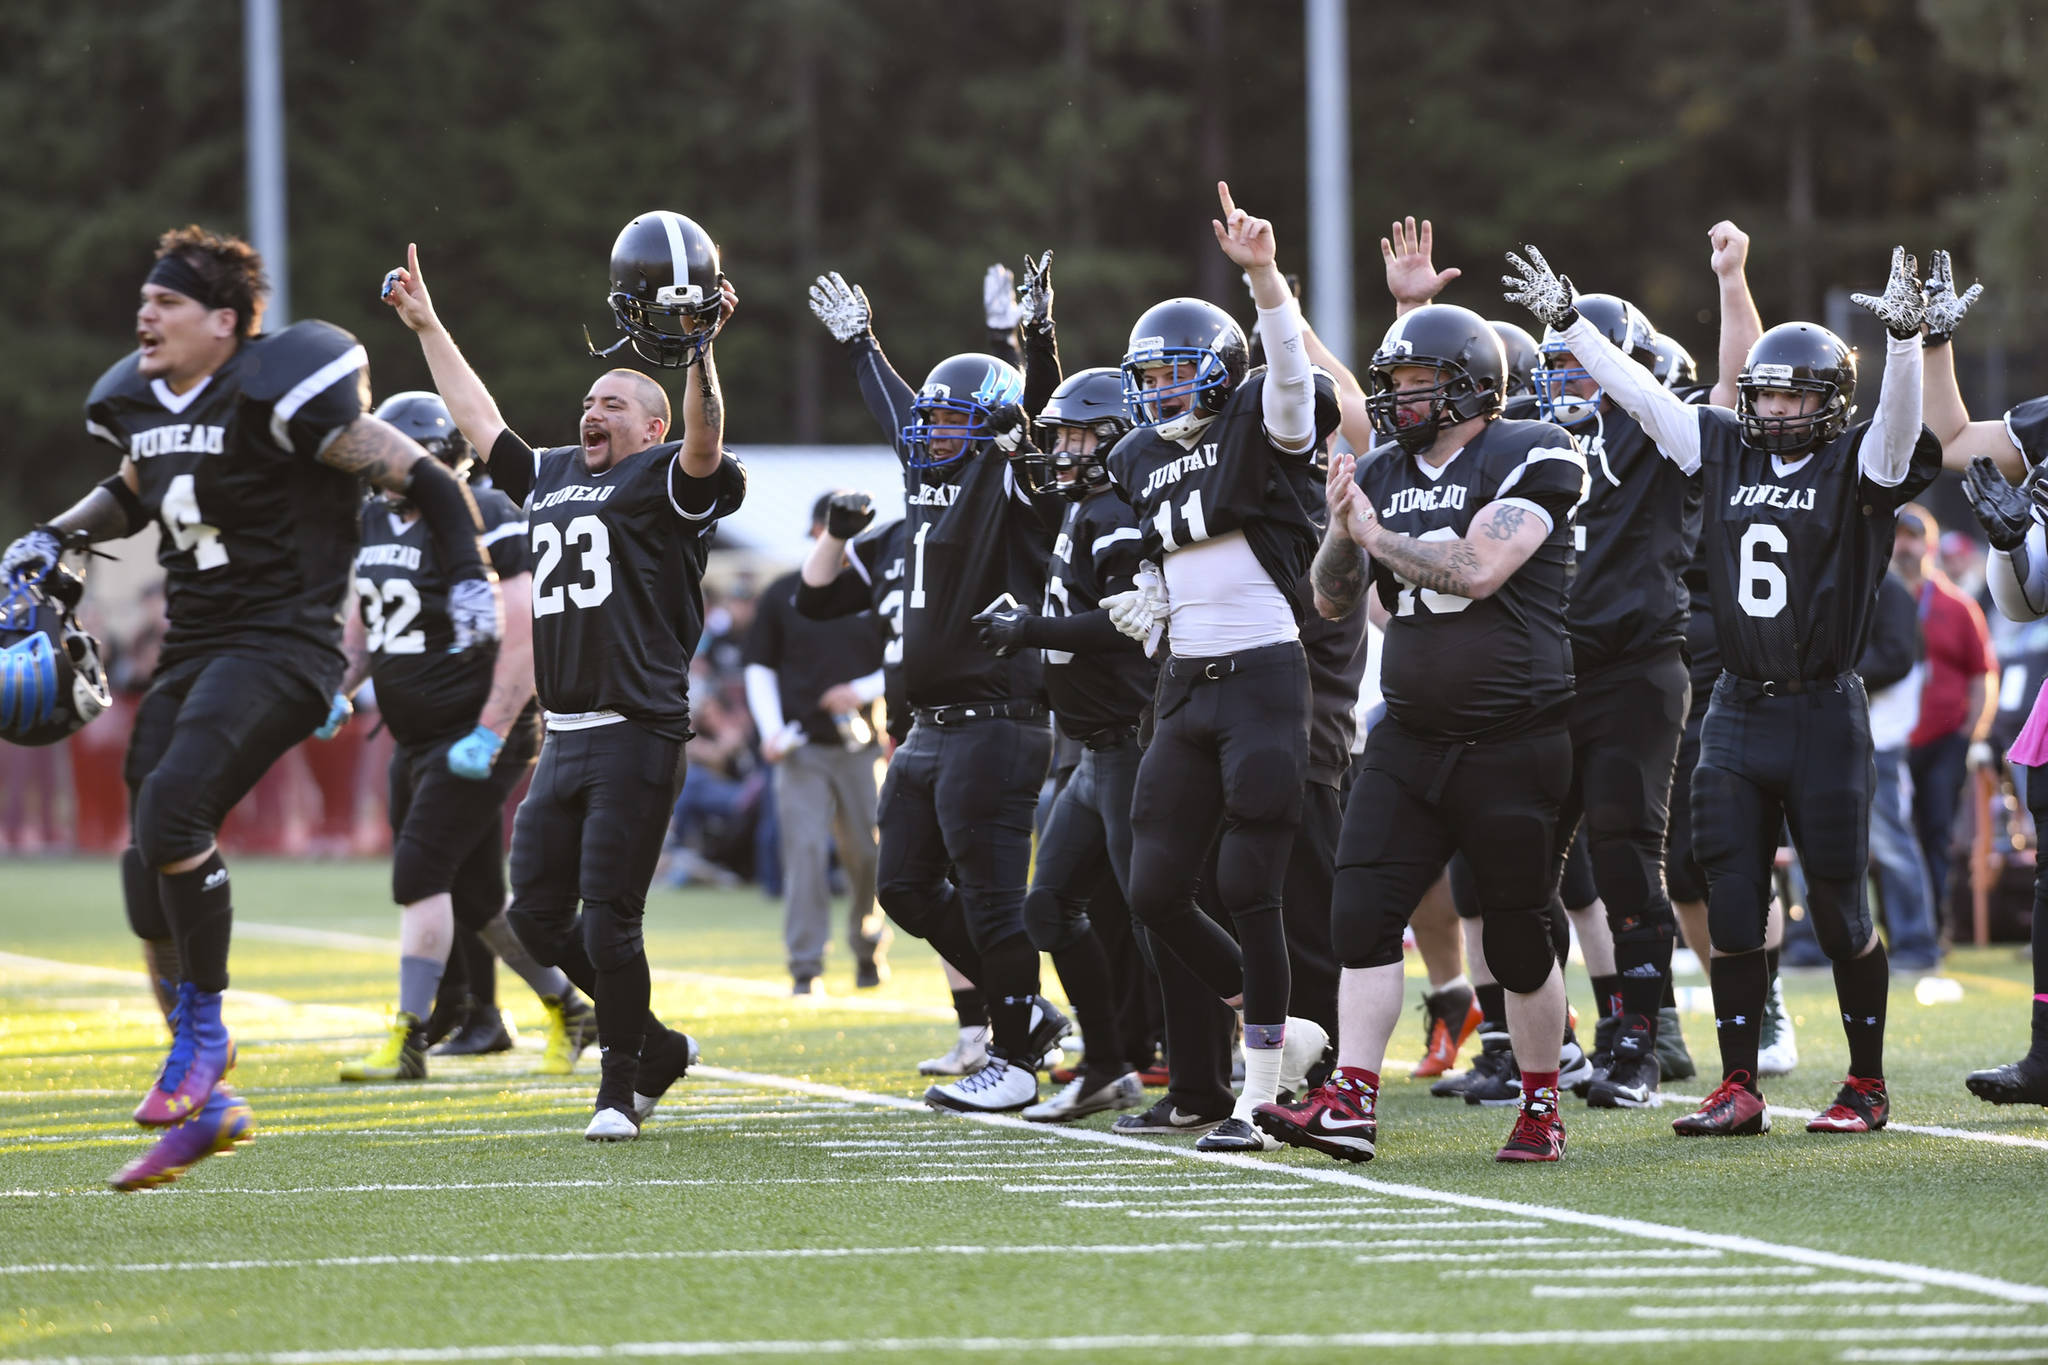 Legends players celebrate their first touchdown at the Juneau Alumni Football Game with football players, dance team members and cheerleaders from Juneau-Douglas and Thunder Mountain High Schools at Adair-Kennedy Memorial Field on Friday, May 24, 2019. (Michael Penn | Juneau Empire)